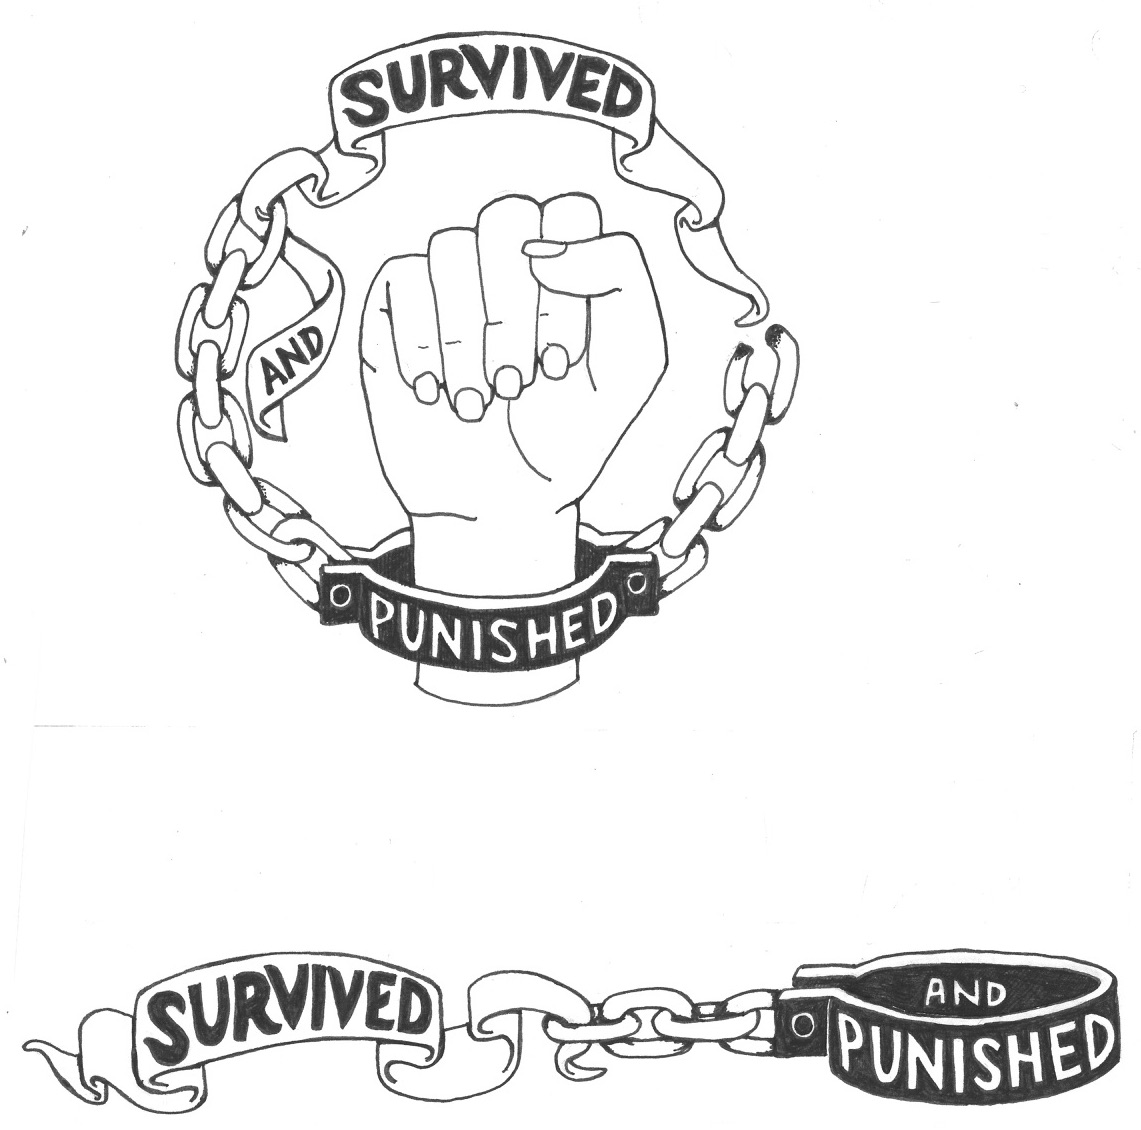 the Survived and Punished national logo: a fist with a handcuff around the wrist and chains reaching above the fist to a a piece of cloth, with the words Survived and Punished.